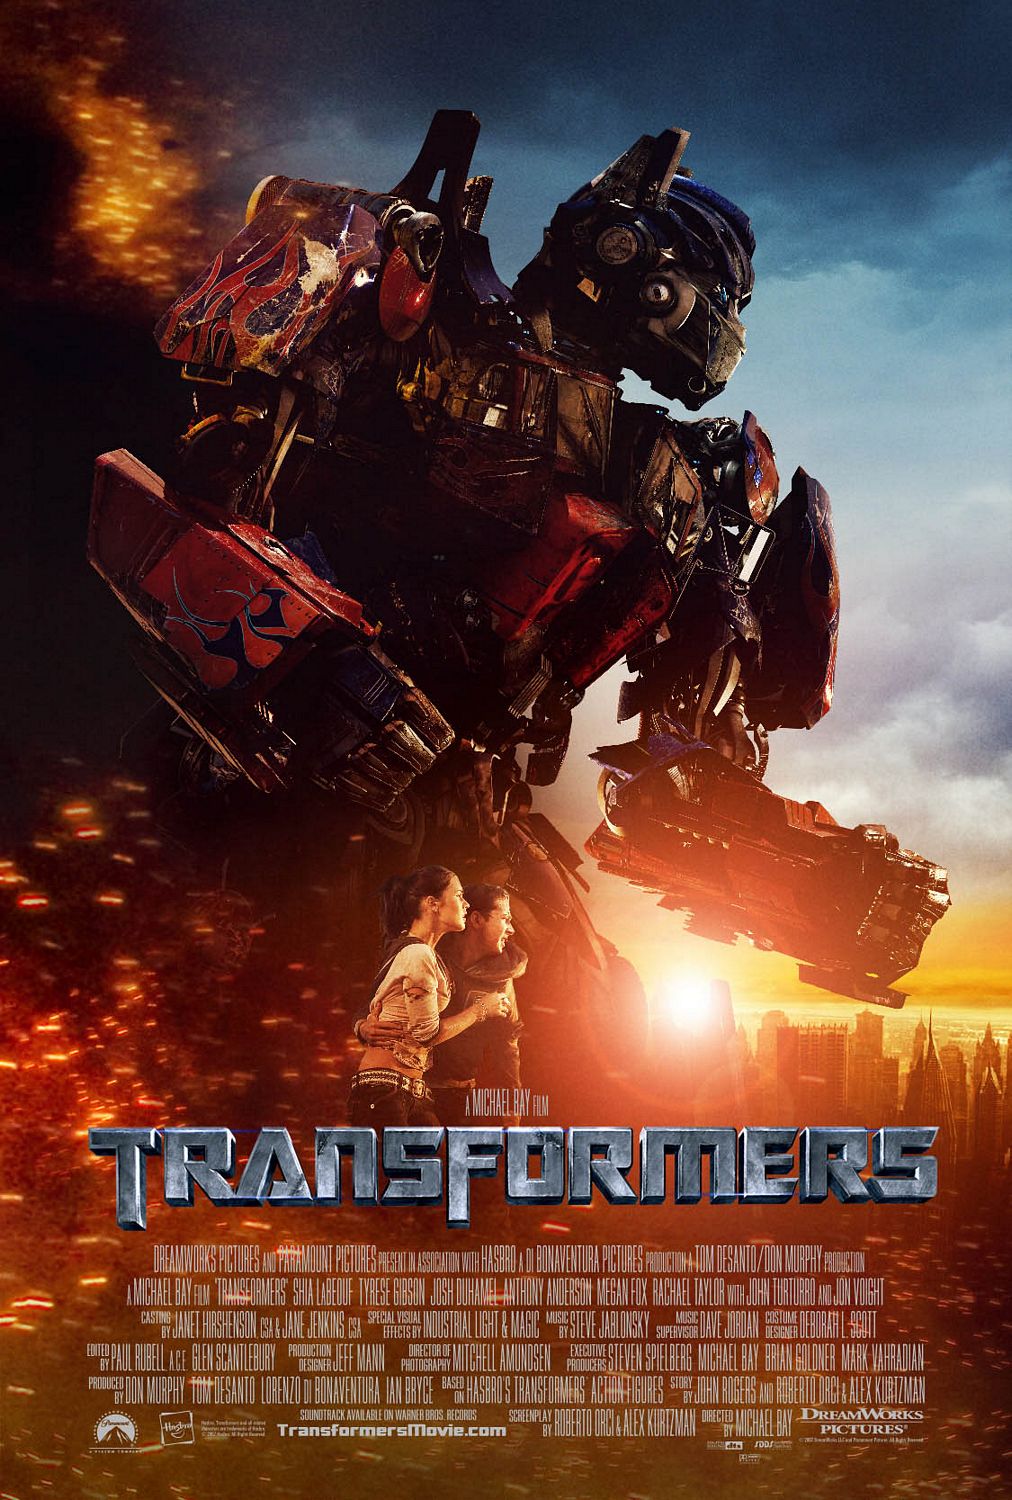 FULL MOVIE: Transformers (2007) [Action]